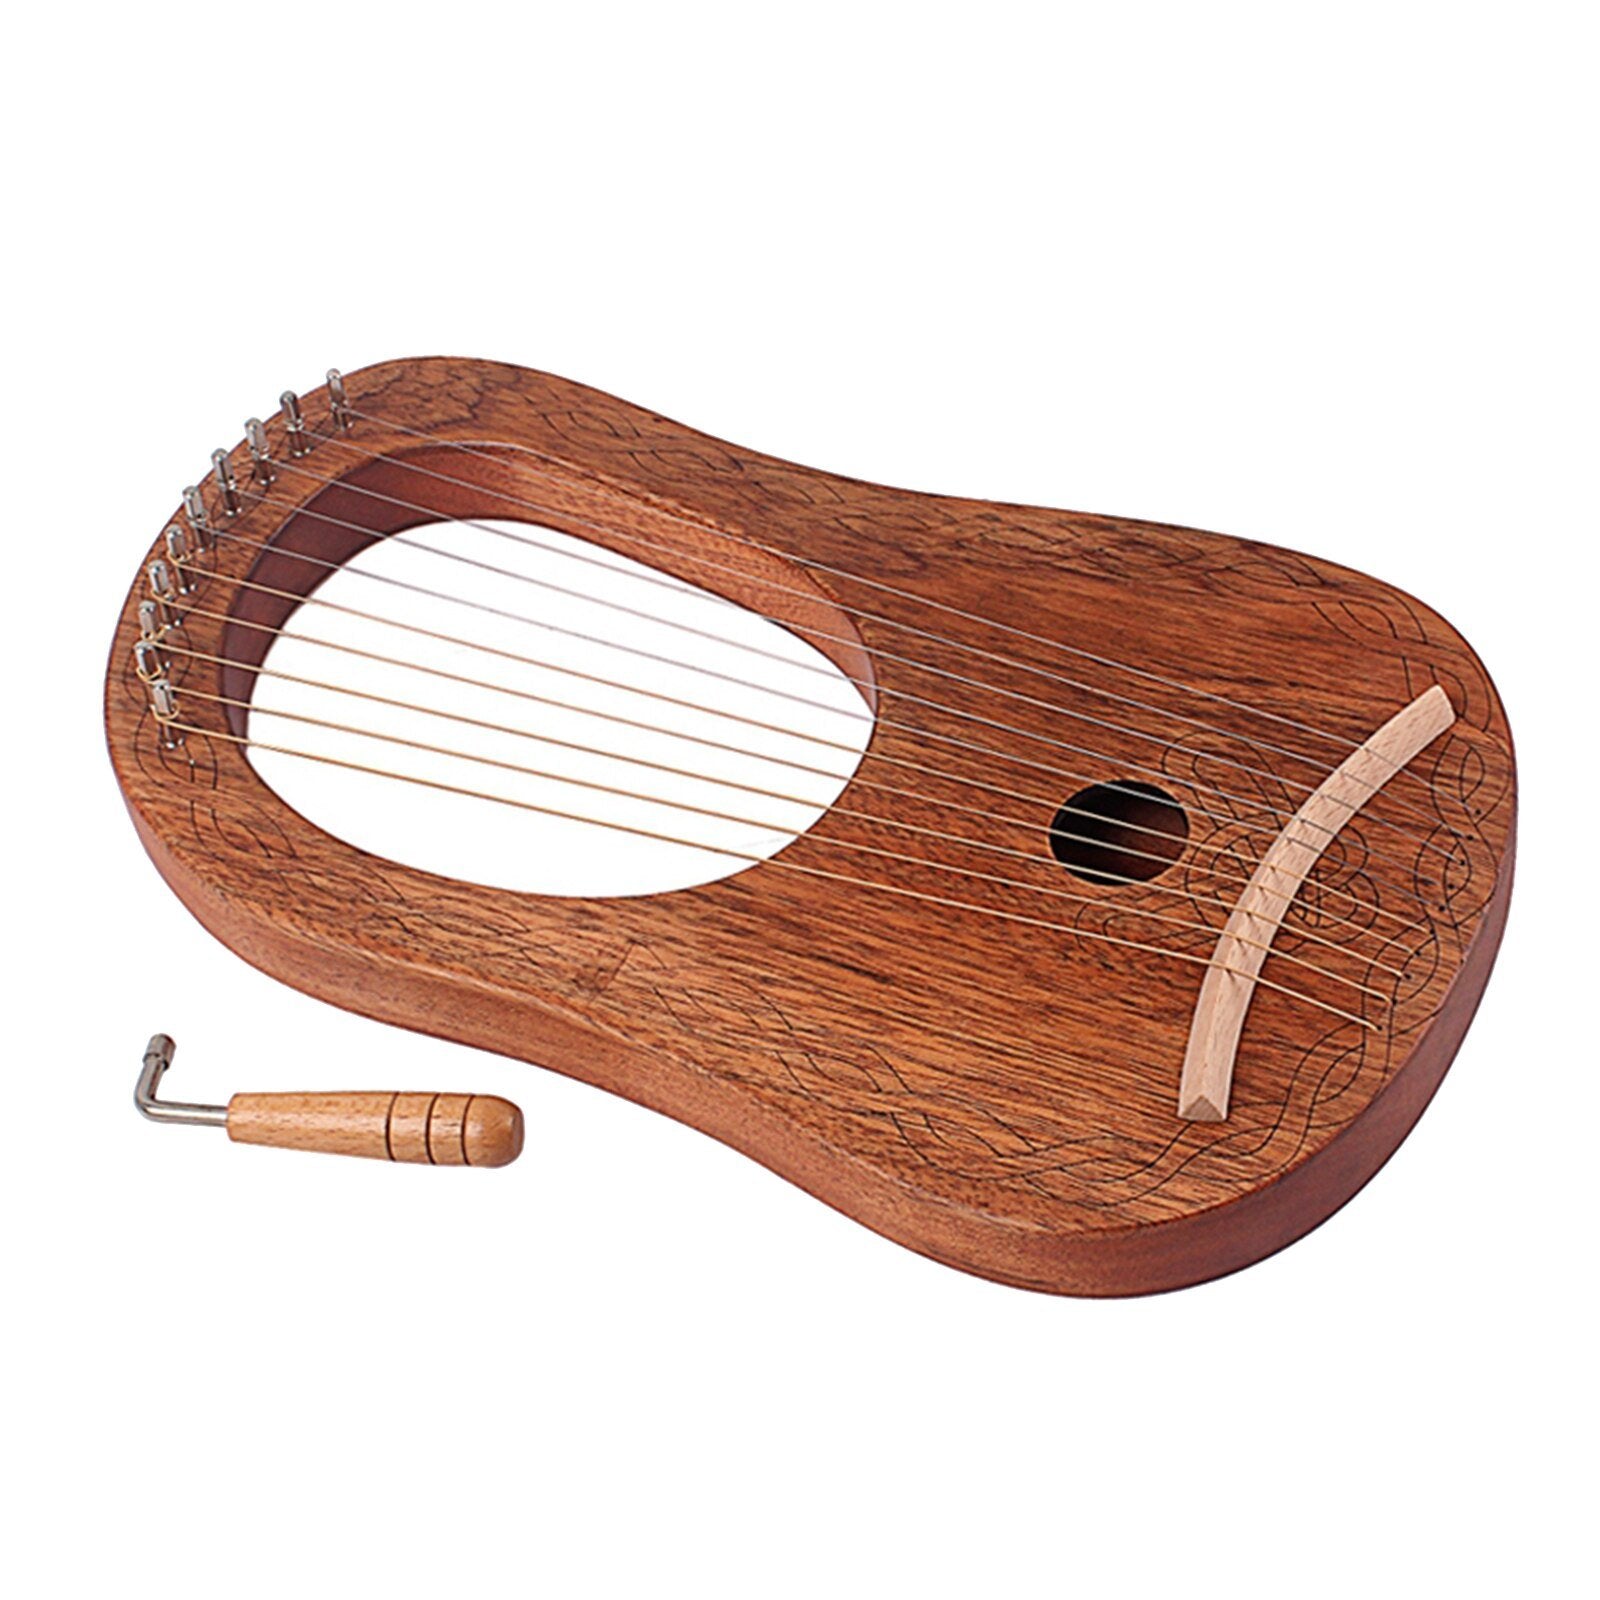 Exquisite 10 Strings Lyre Harp with Tuning Wrench Great Gifts for Music Lovers Kids Adults Friends Christmas Present - AKLOT